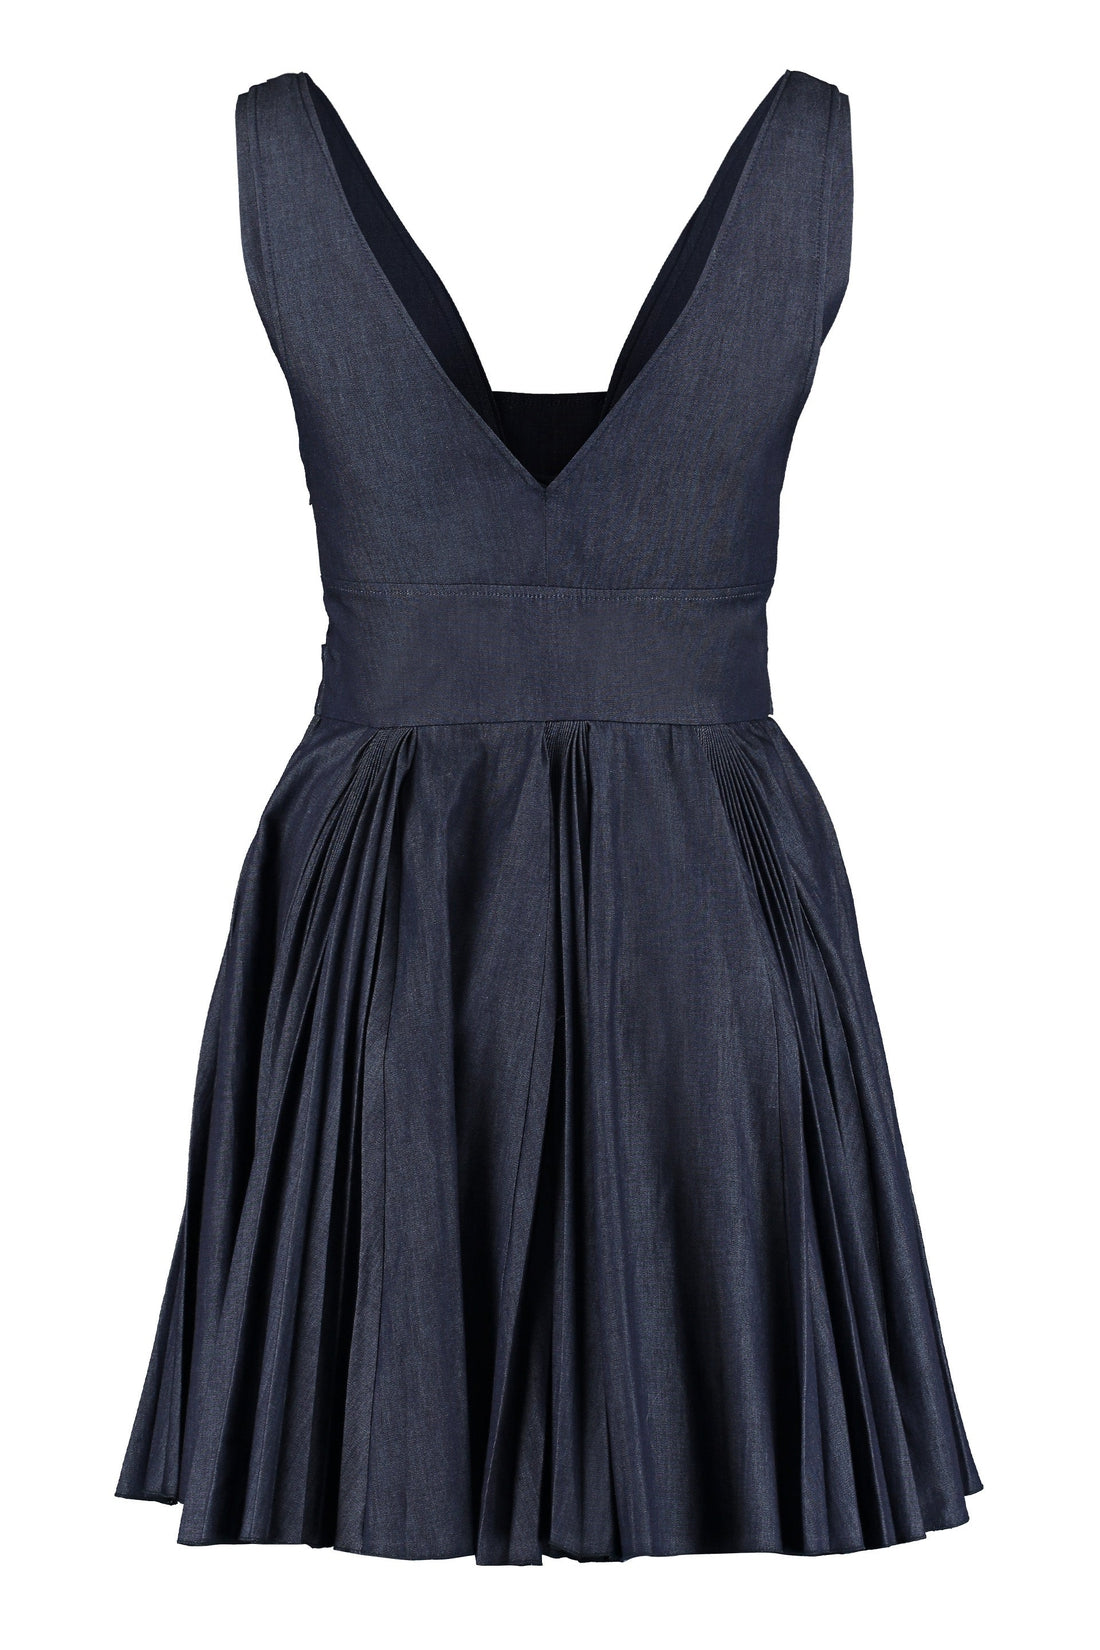 Giovanni Bedin-OUTLET-SALE-Pleated dress-ARCHIVIST